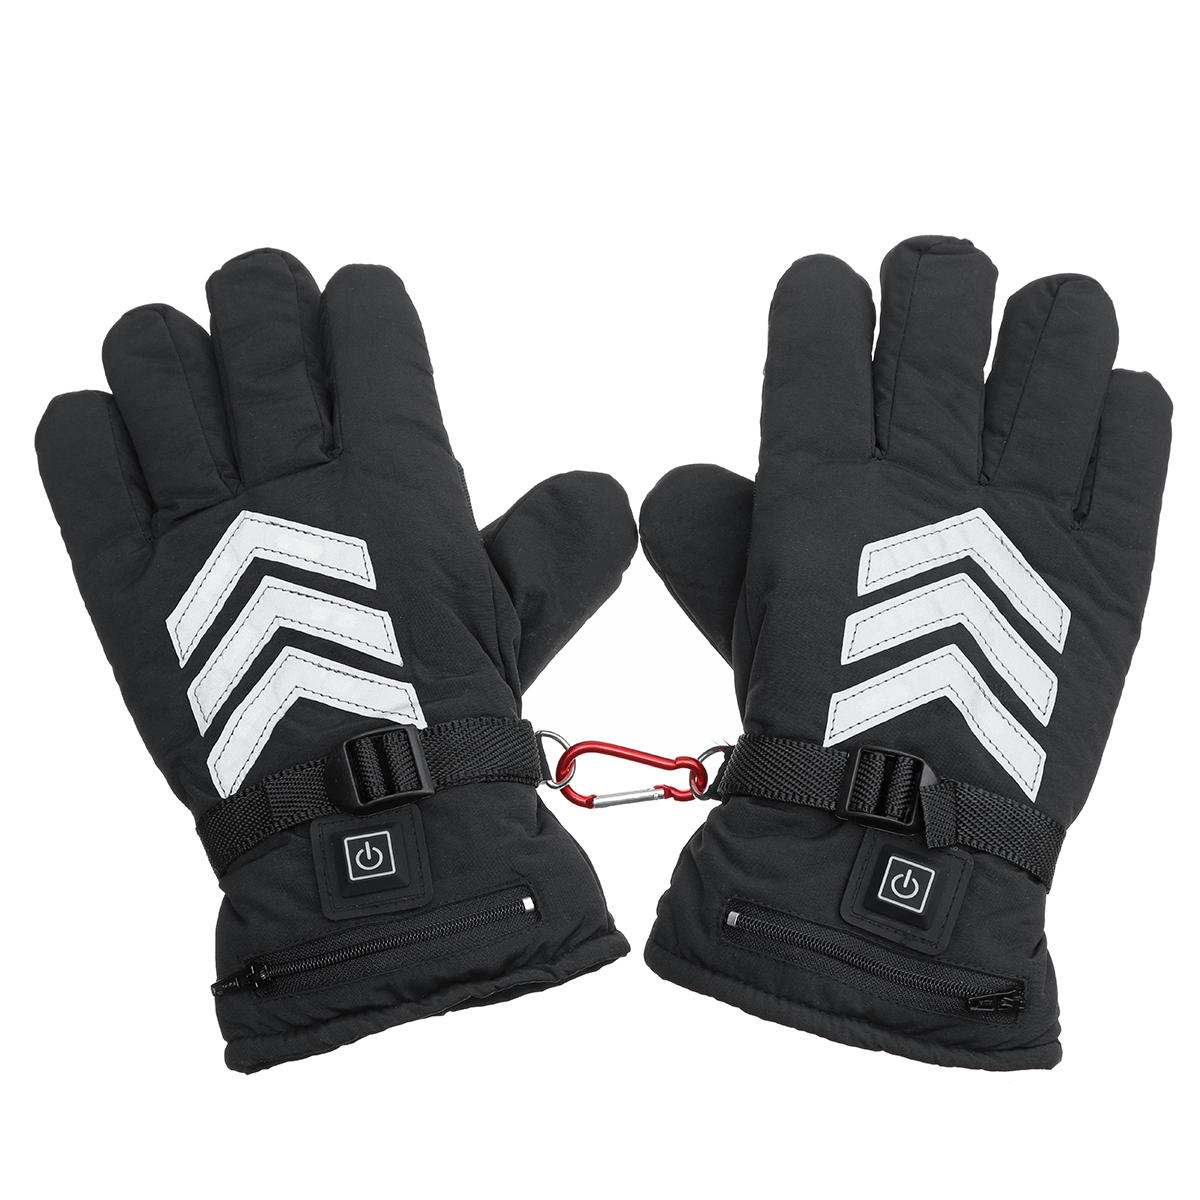 Touch Screen Electric Heated Gloves Rechargeable Battery Motorcycle Outdoor Hands Warmer